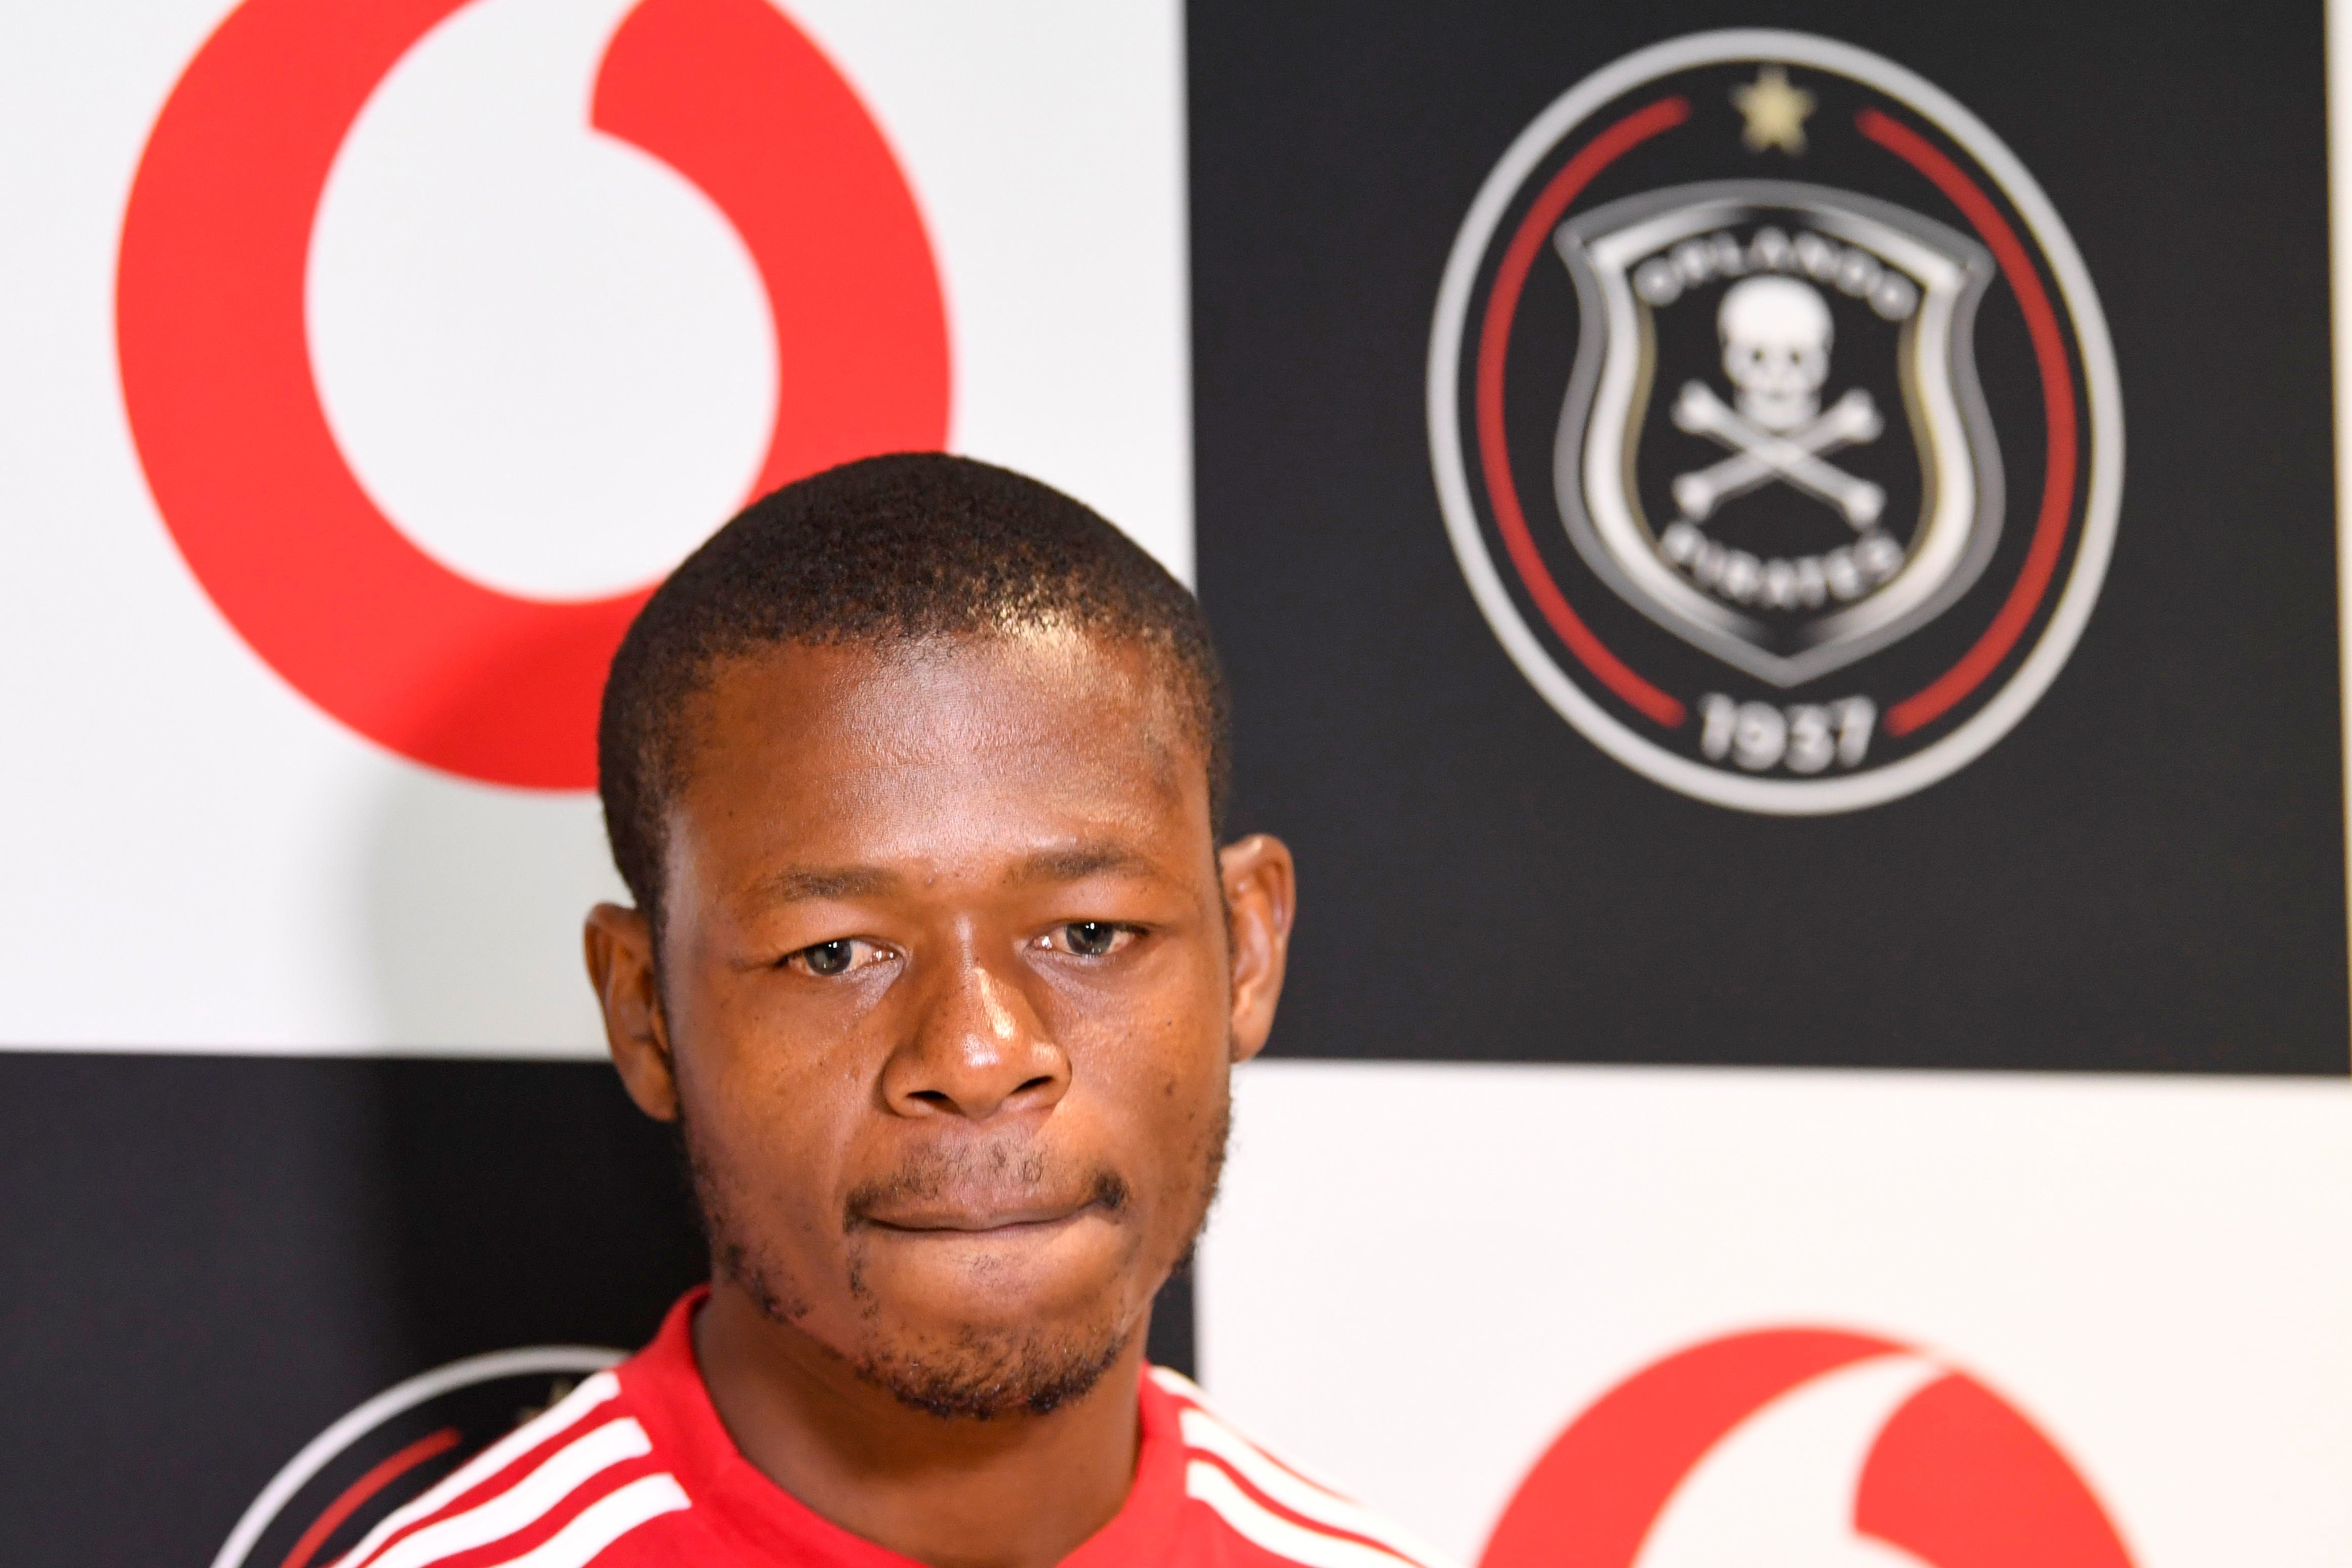 Pirates must 'look for opportunities': Riveiro on transfer window